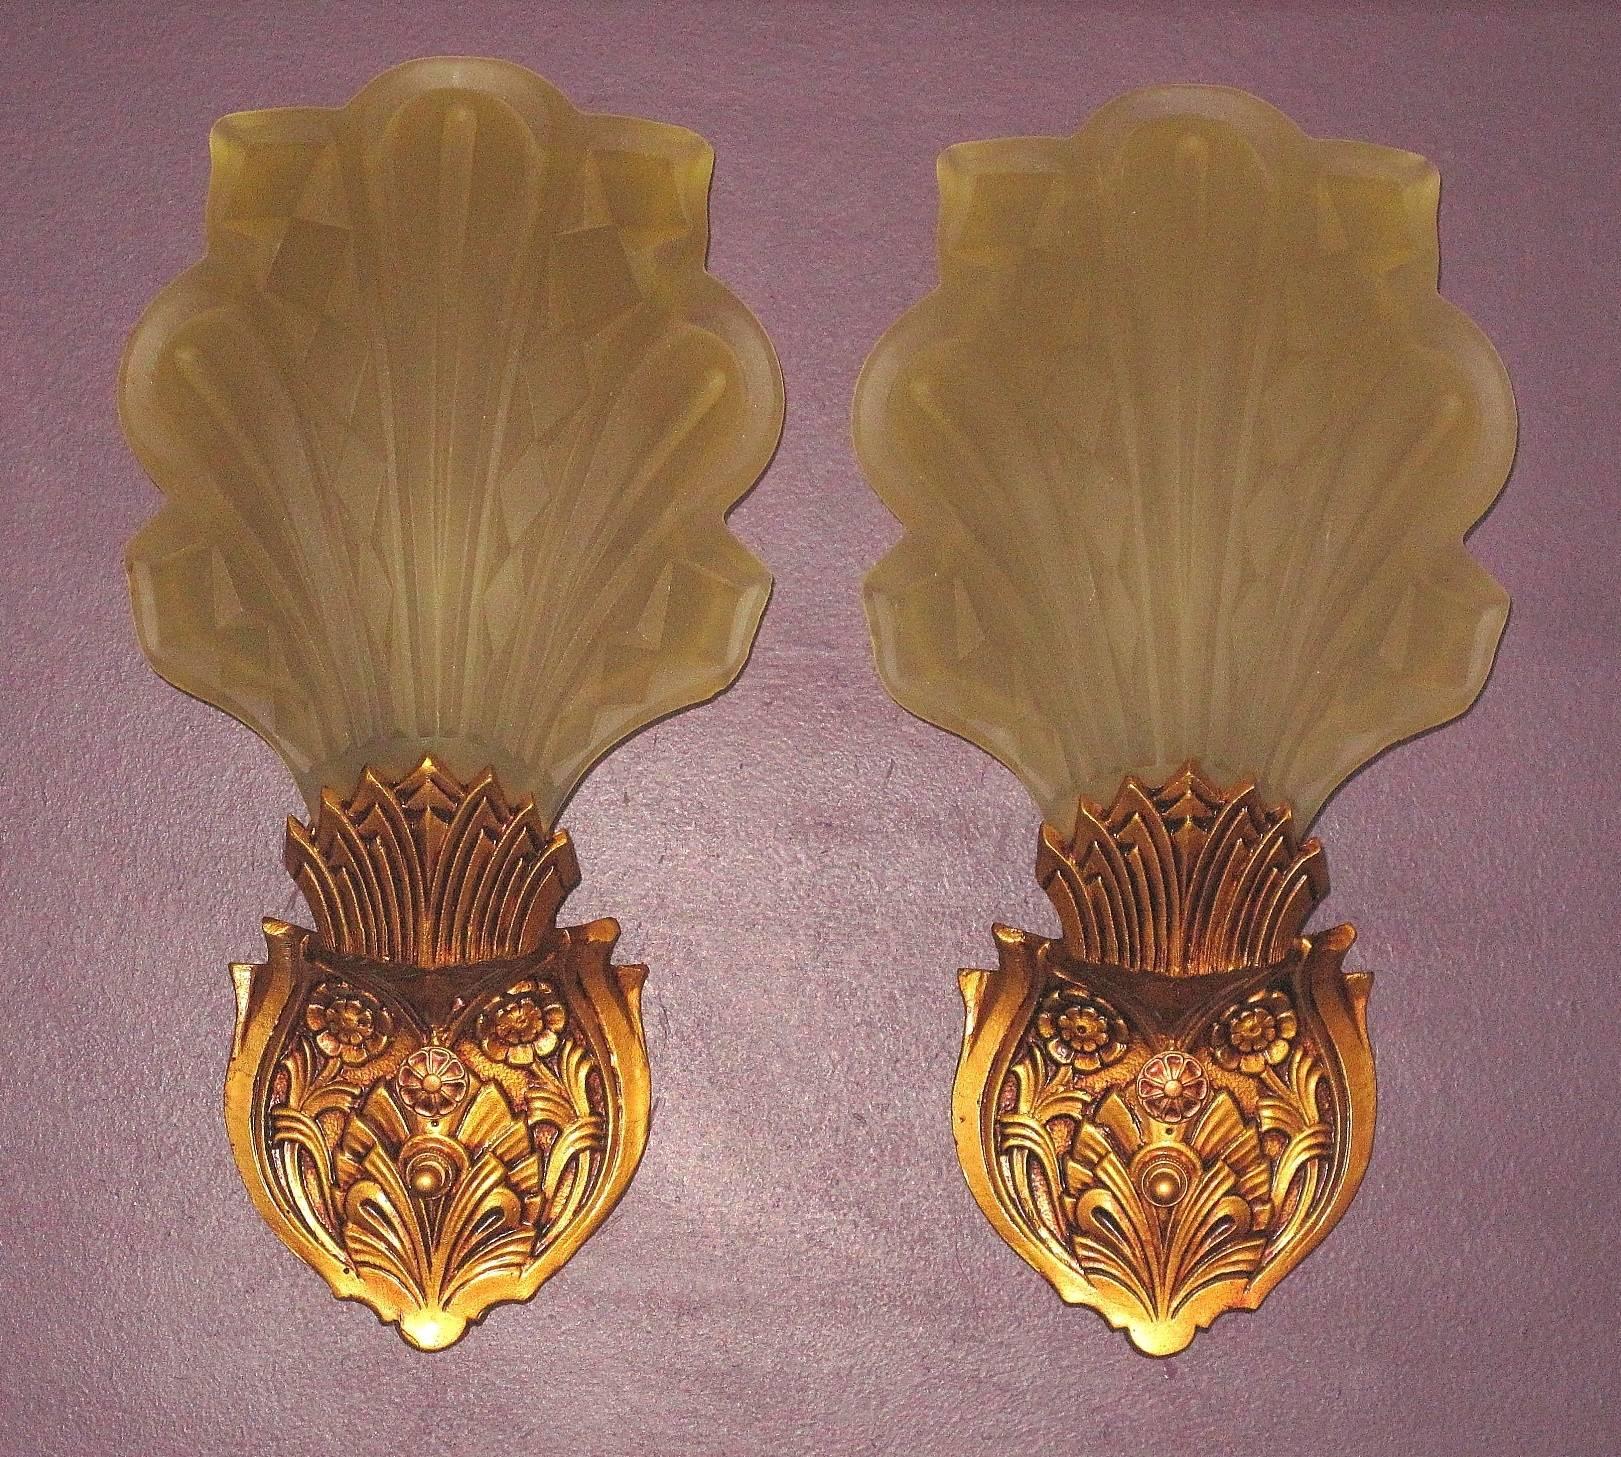 2 Pair of 1920s Early 1930s Art Deco Sconces In Good Condition For Sale In Prescott, AZ